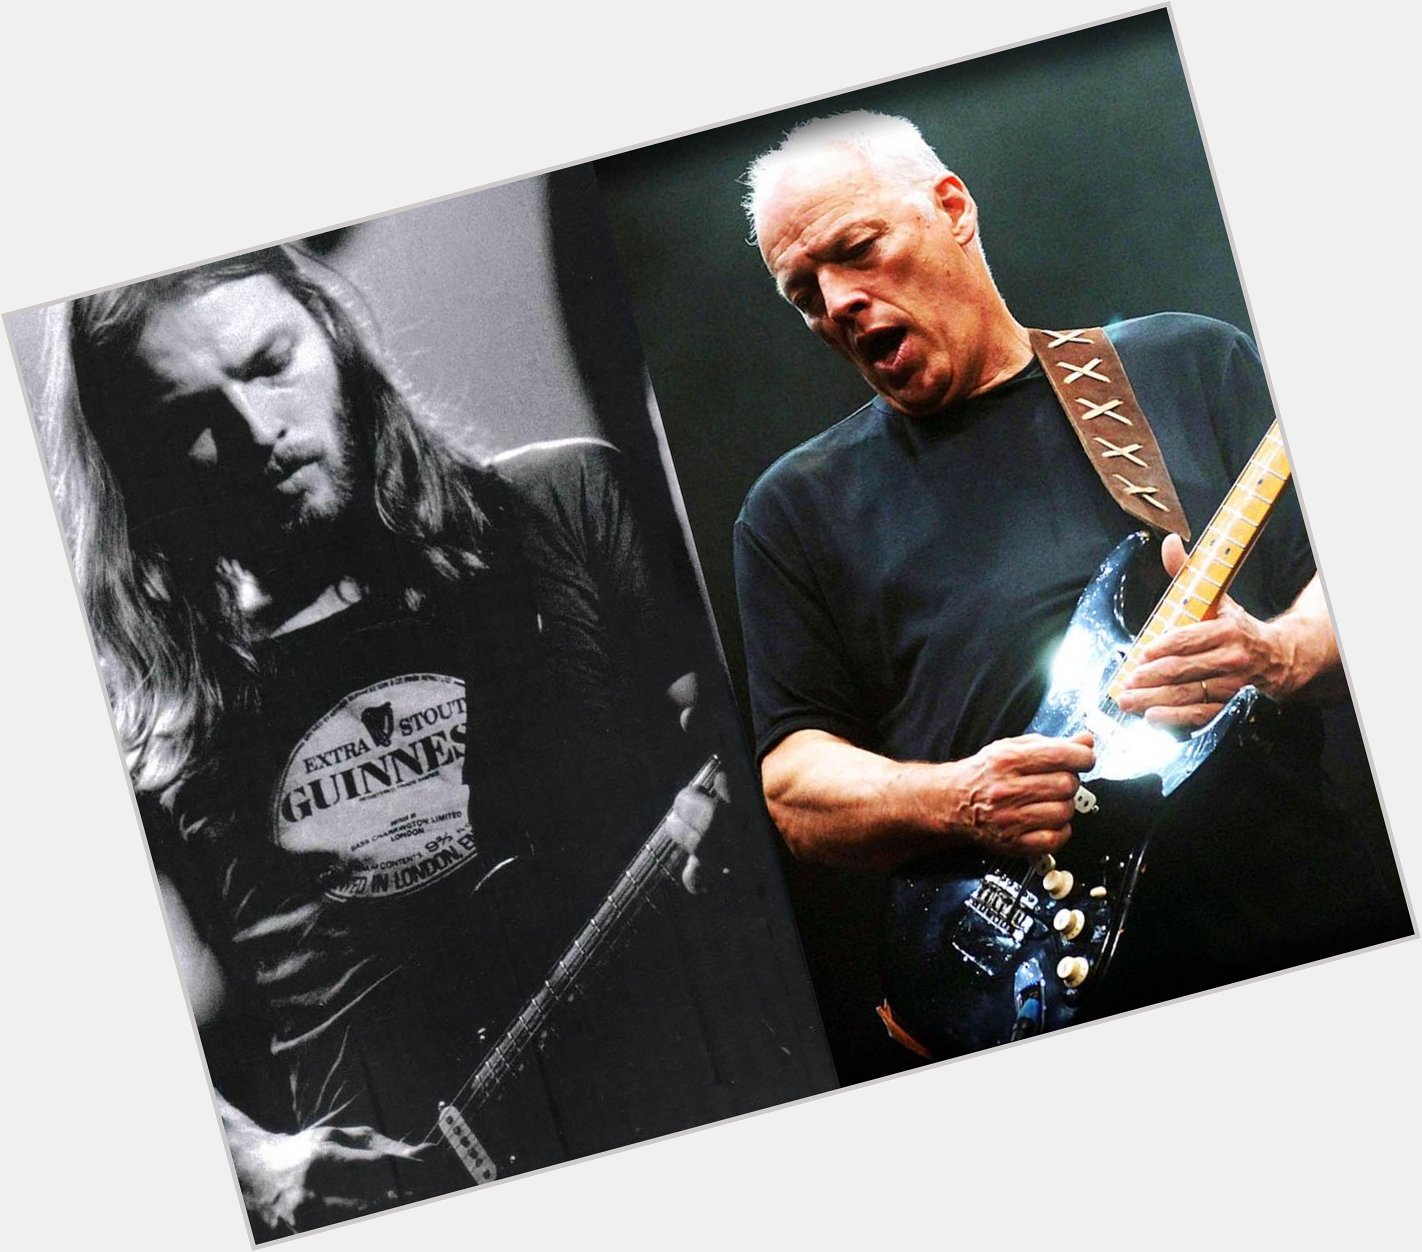 Happy birthday music legend David Gilmour 69 today! His first solo album in nine years to be released later this year 